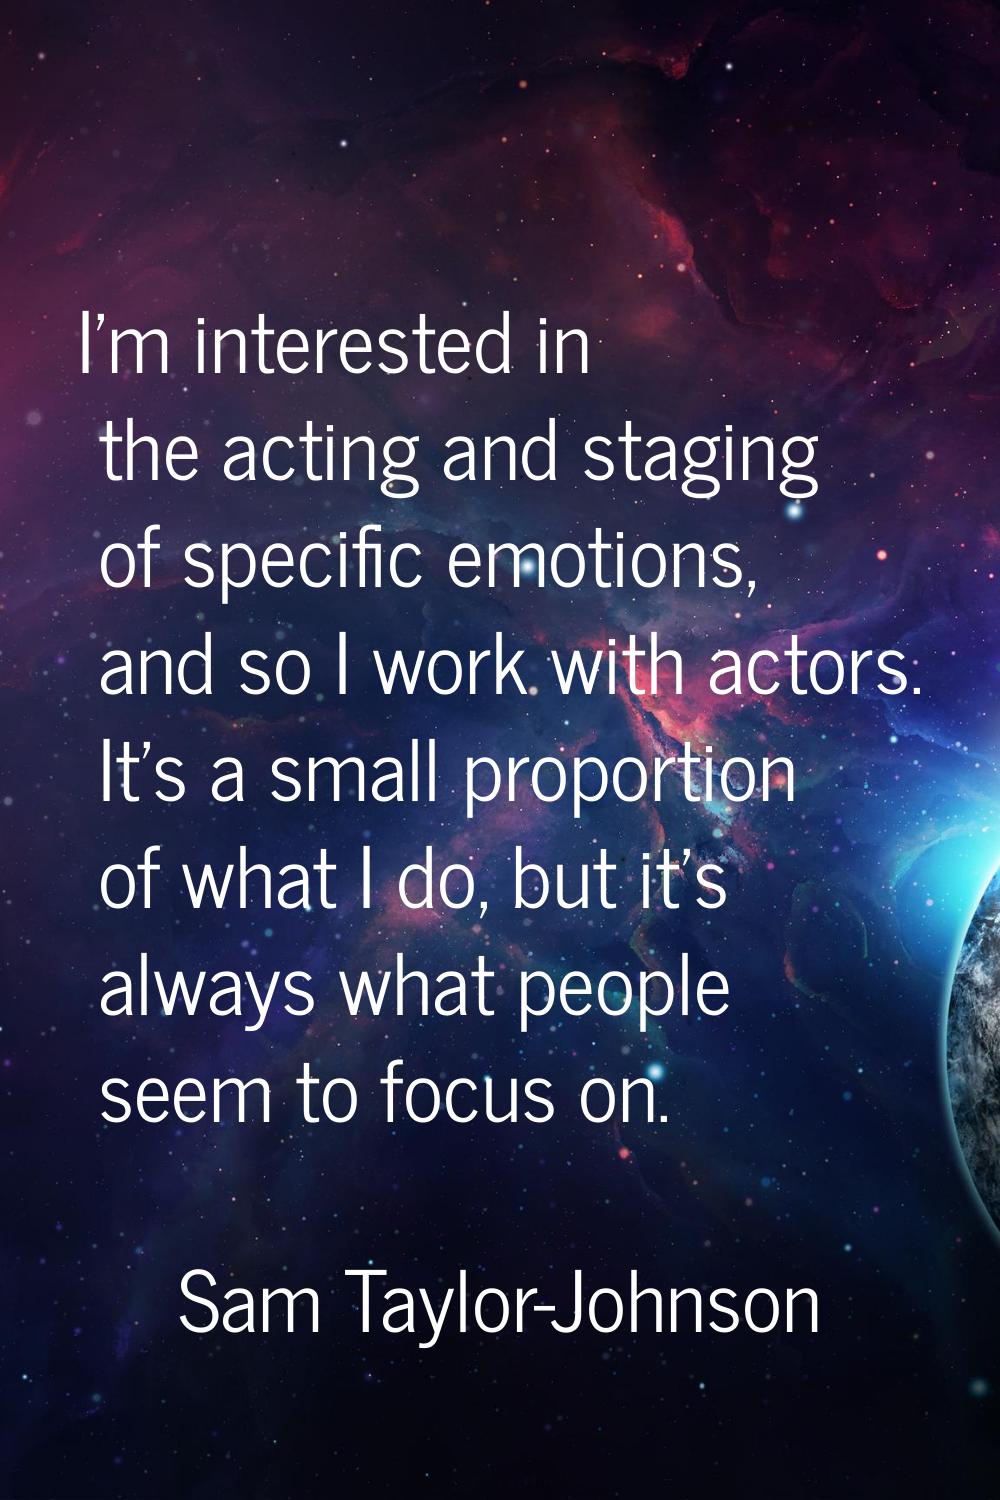 I'm interested in the acting and staging of specific emotions, and so I work with actors. It's a sm